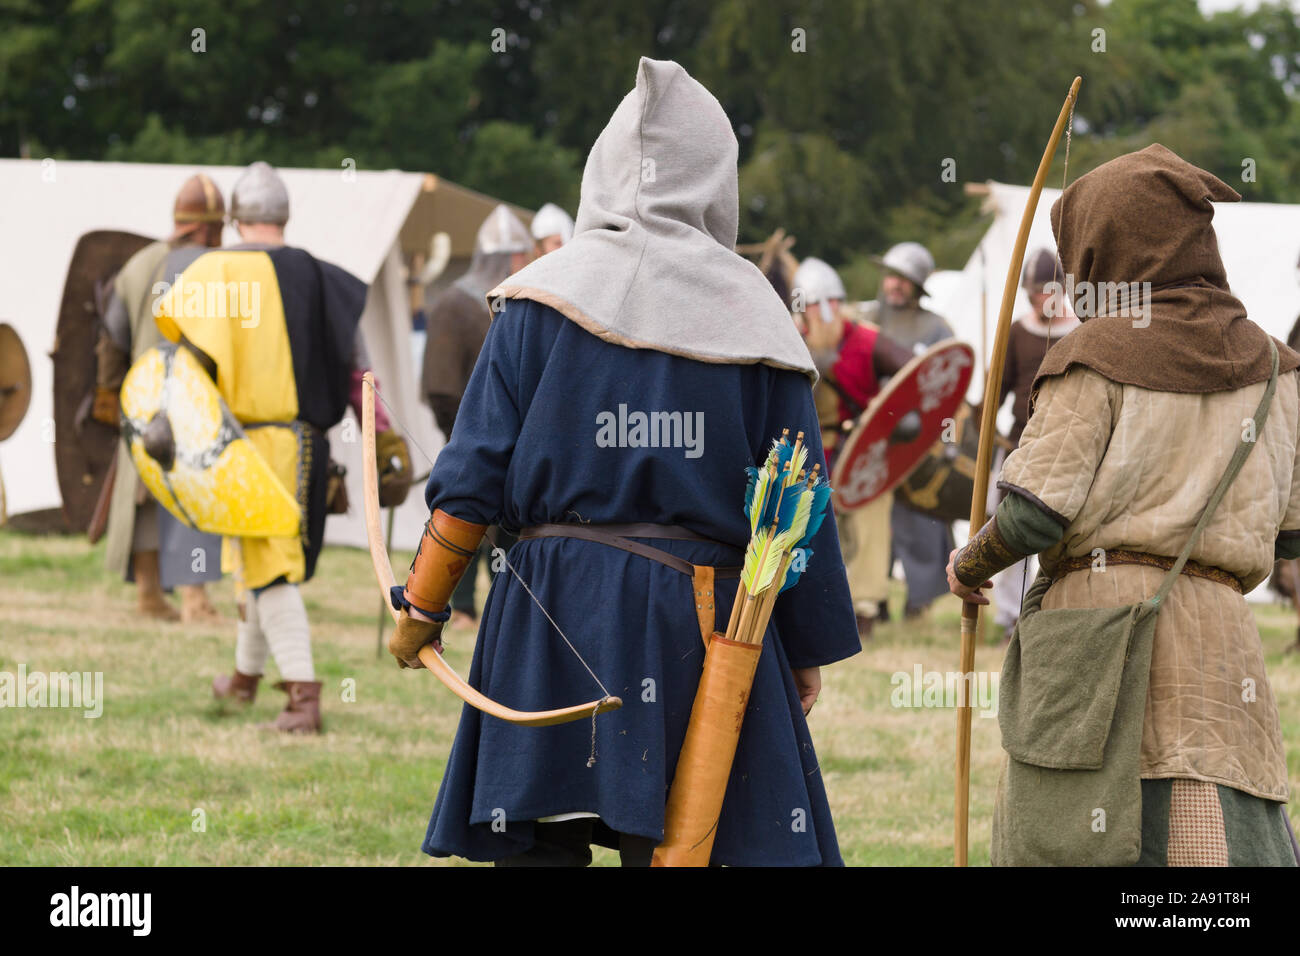 Medieval battle re-enactors dressed as archers belonging to the Cwmwd Ial society re-enacting the battle of Crogen 1165 in North Wales Stock Photo